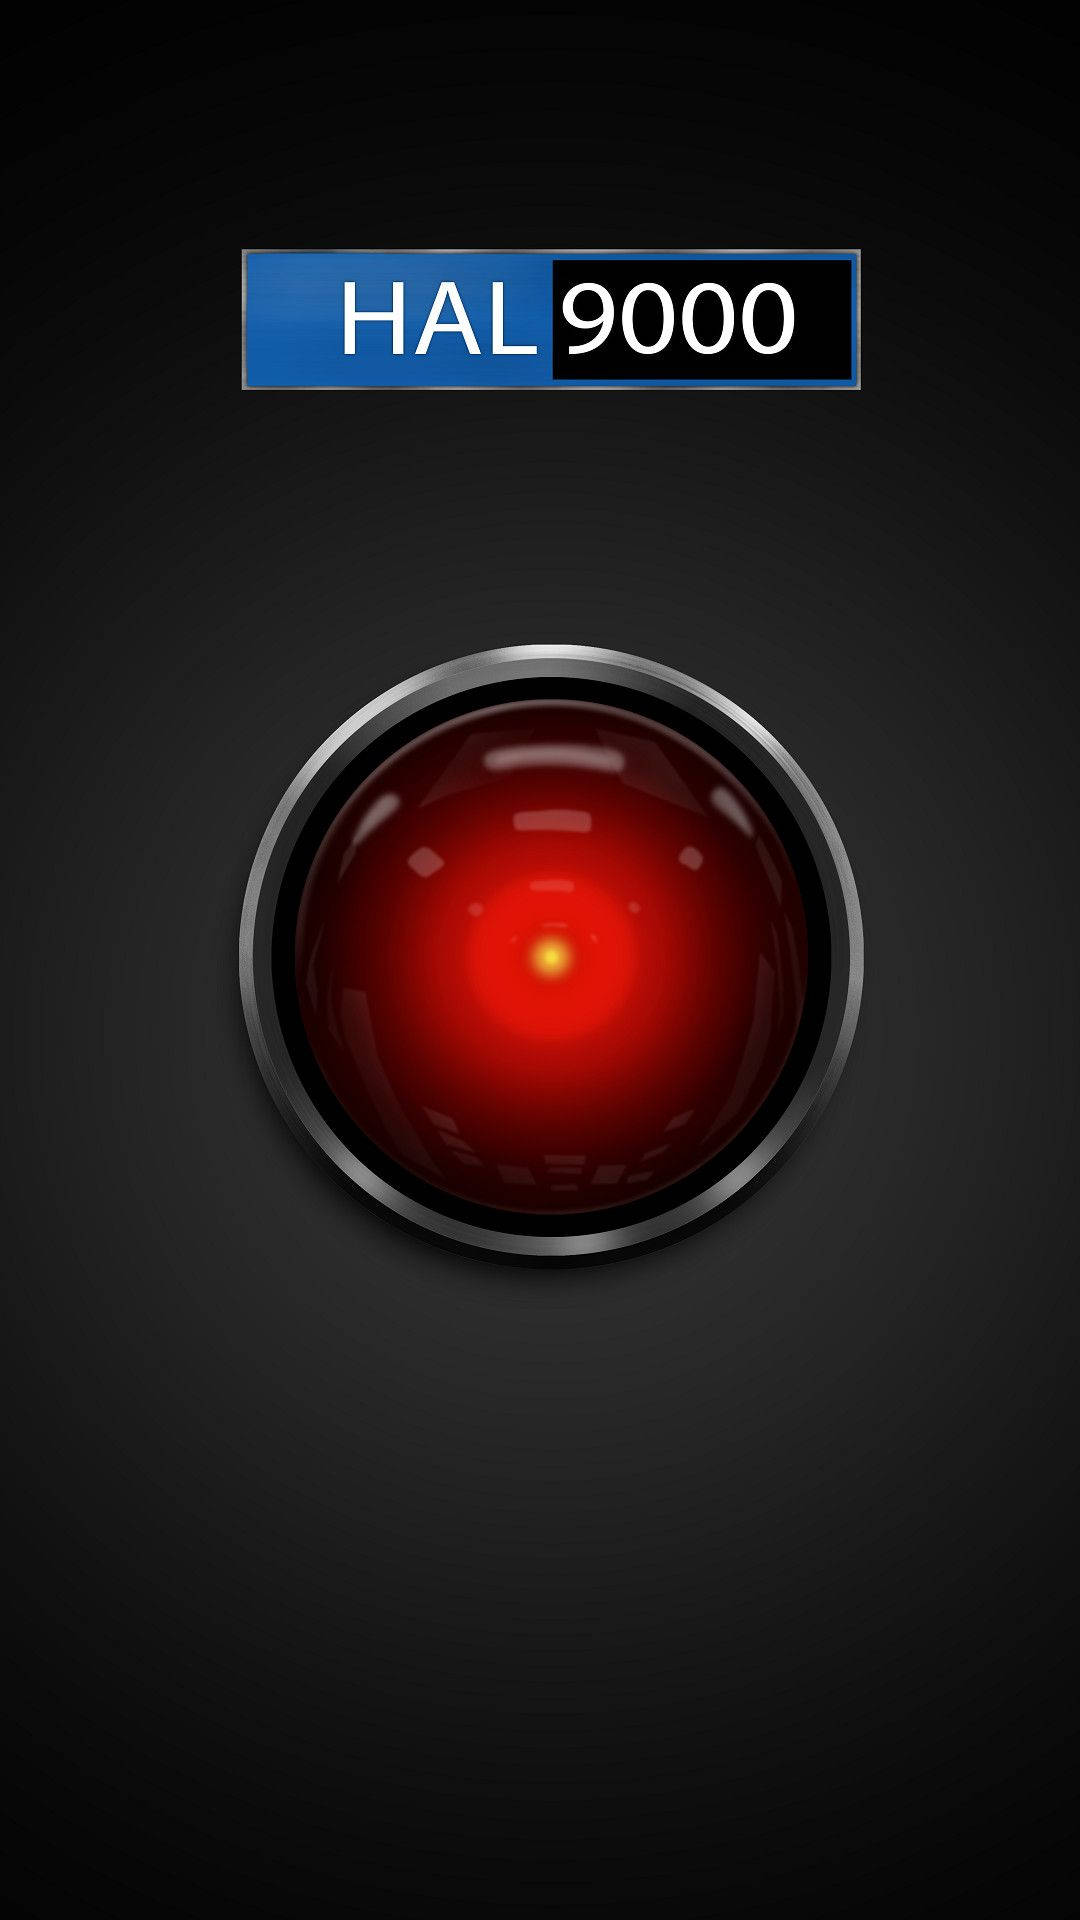 Wallpaper ID 686283  HAL 9000 2001 A Space Odyssey movies science  fiction computer 2K free download